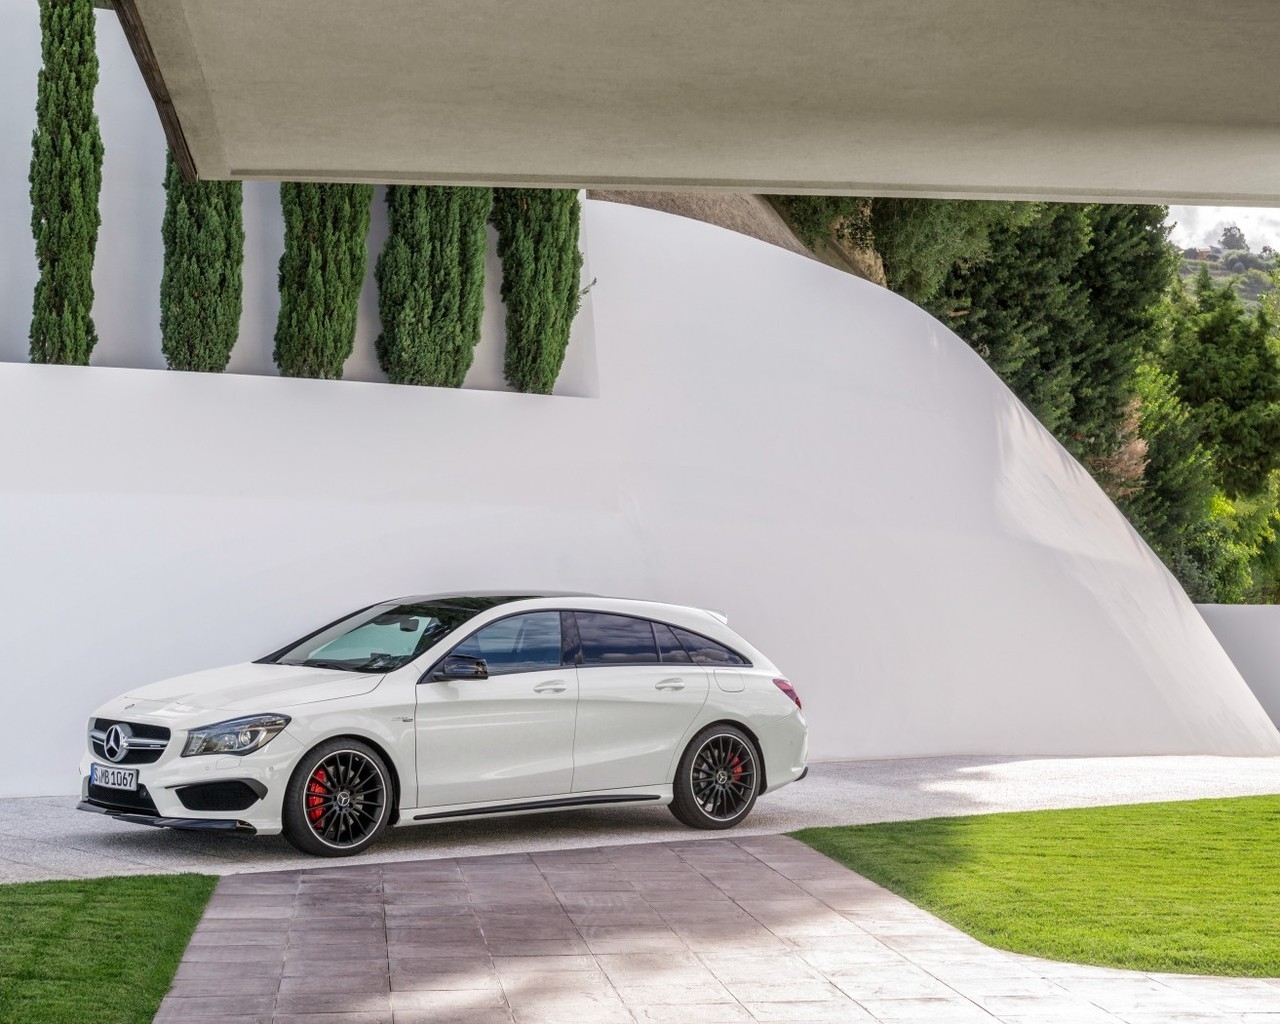 Mercedes CLA 45 AMG 2015 for 1280 x 1024 resolution